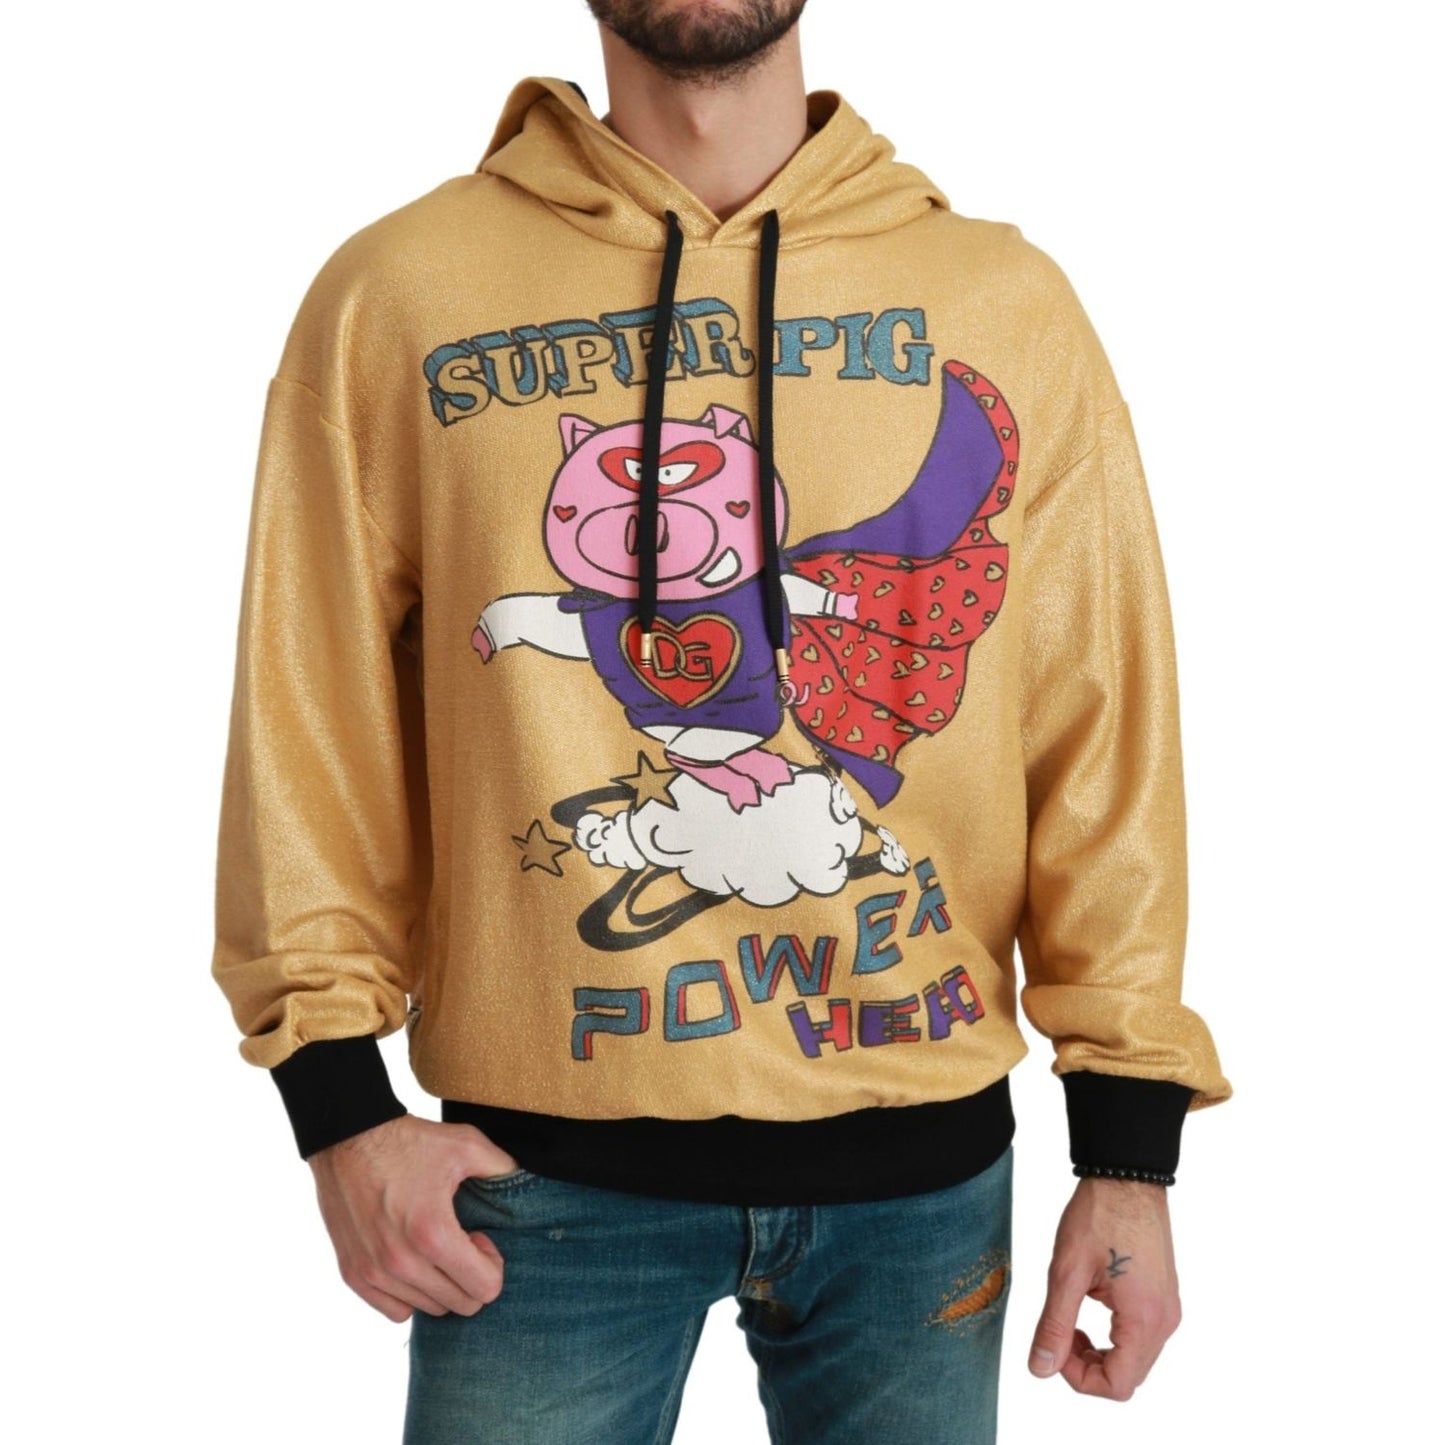 Dolce & Gabbana Exquisite Gold Hooded Cotton Sweater gold-pig-of-the-year-hooded-sweater